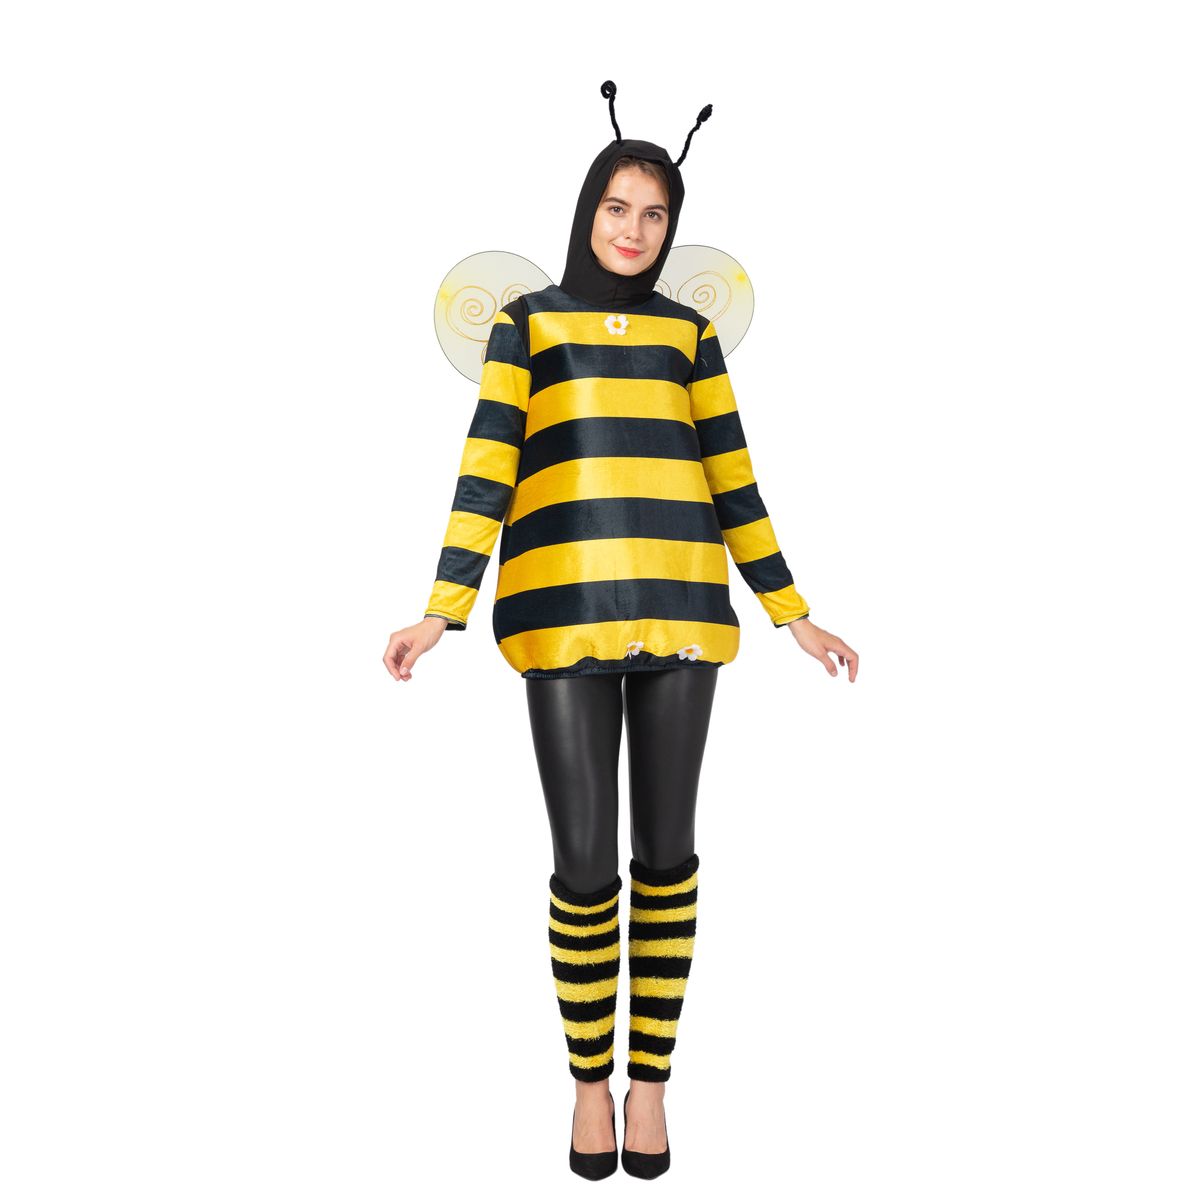 Bumble Bee Costume with Bee Accessories for Women - Adult ...